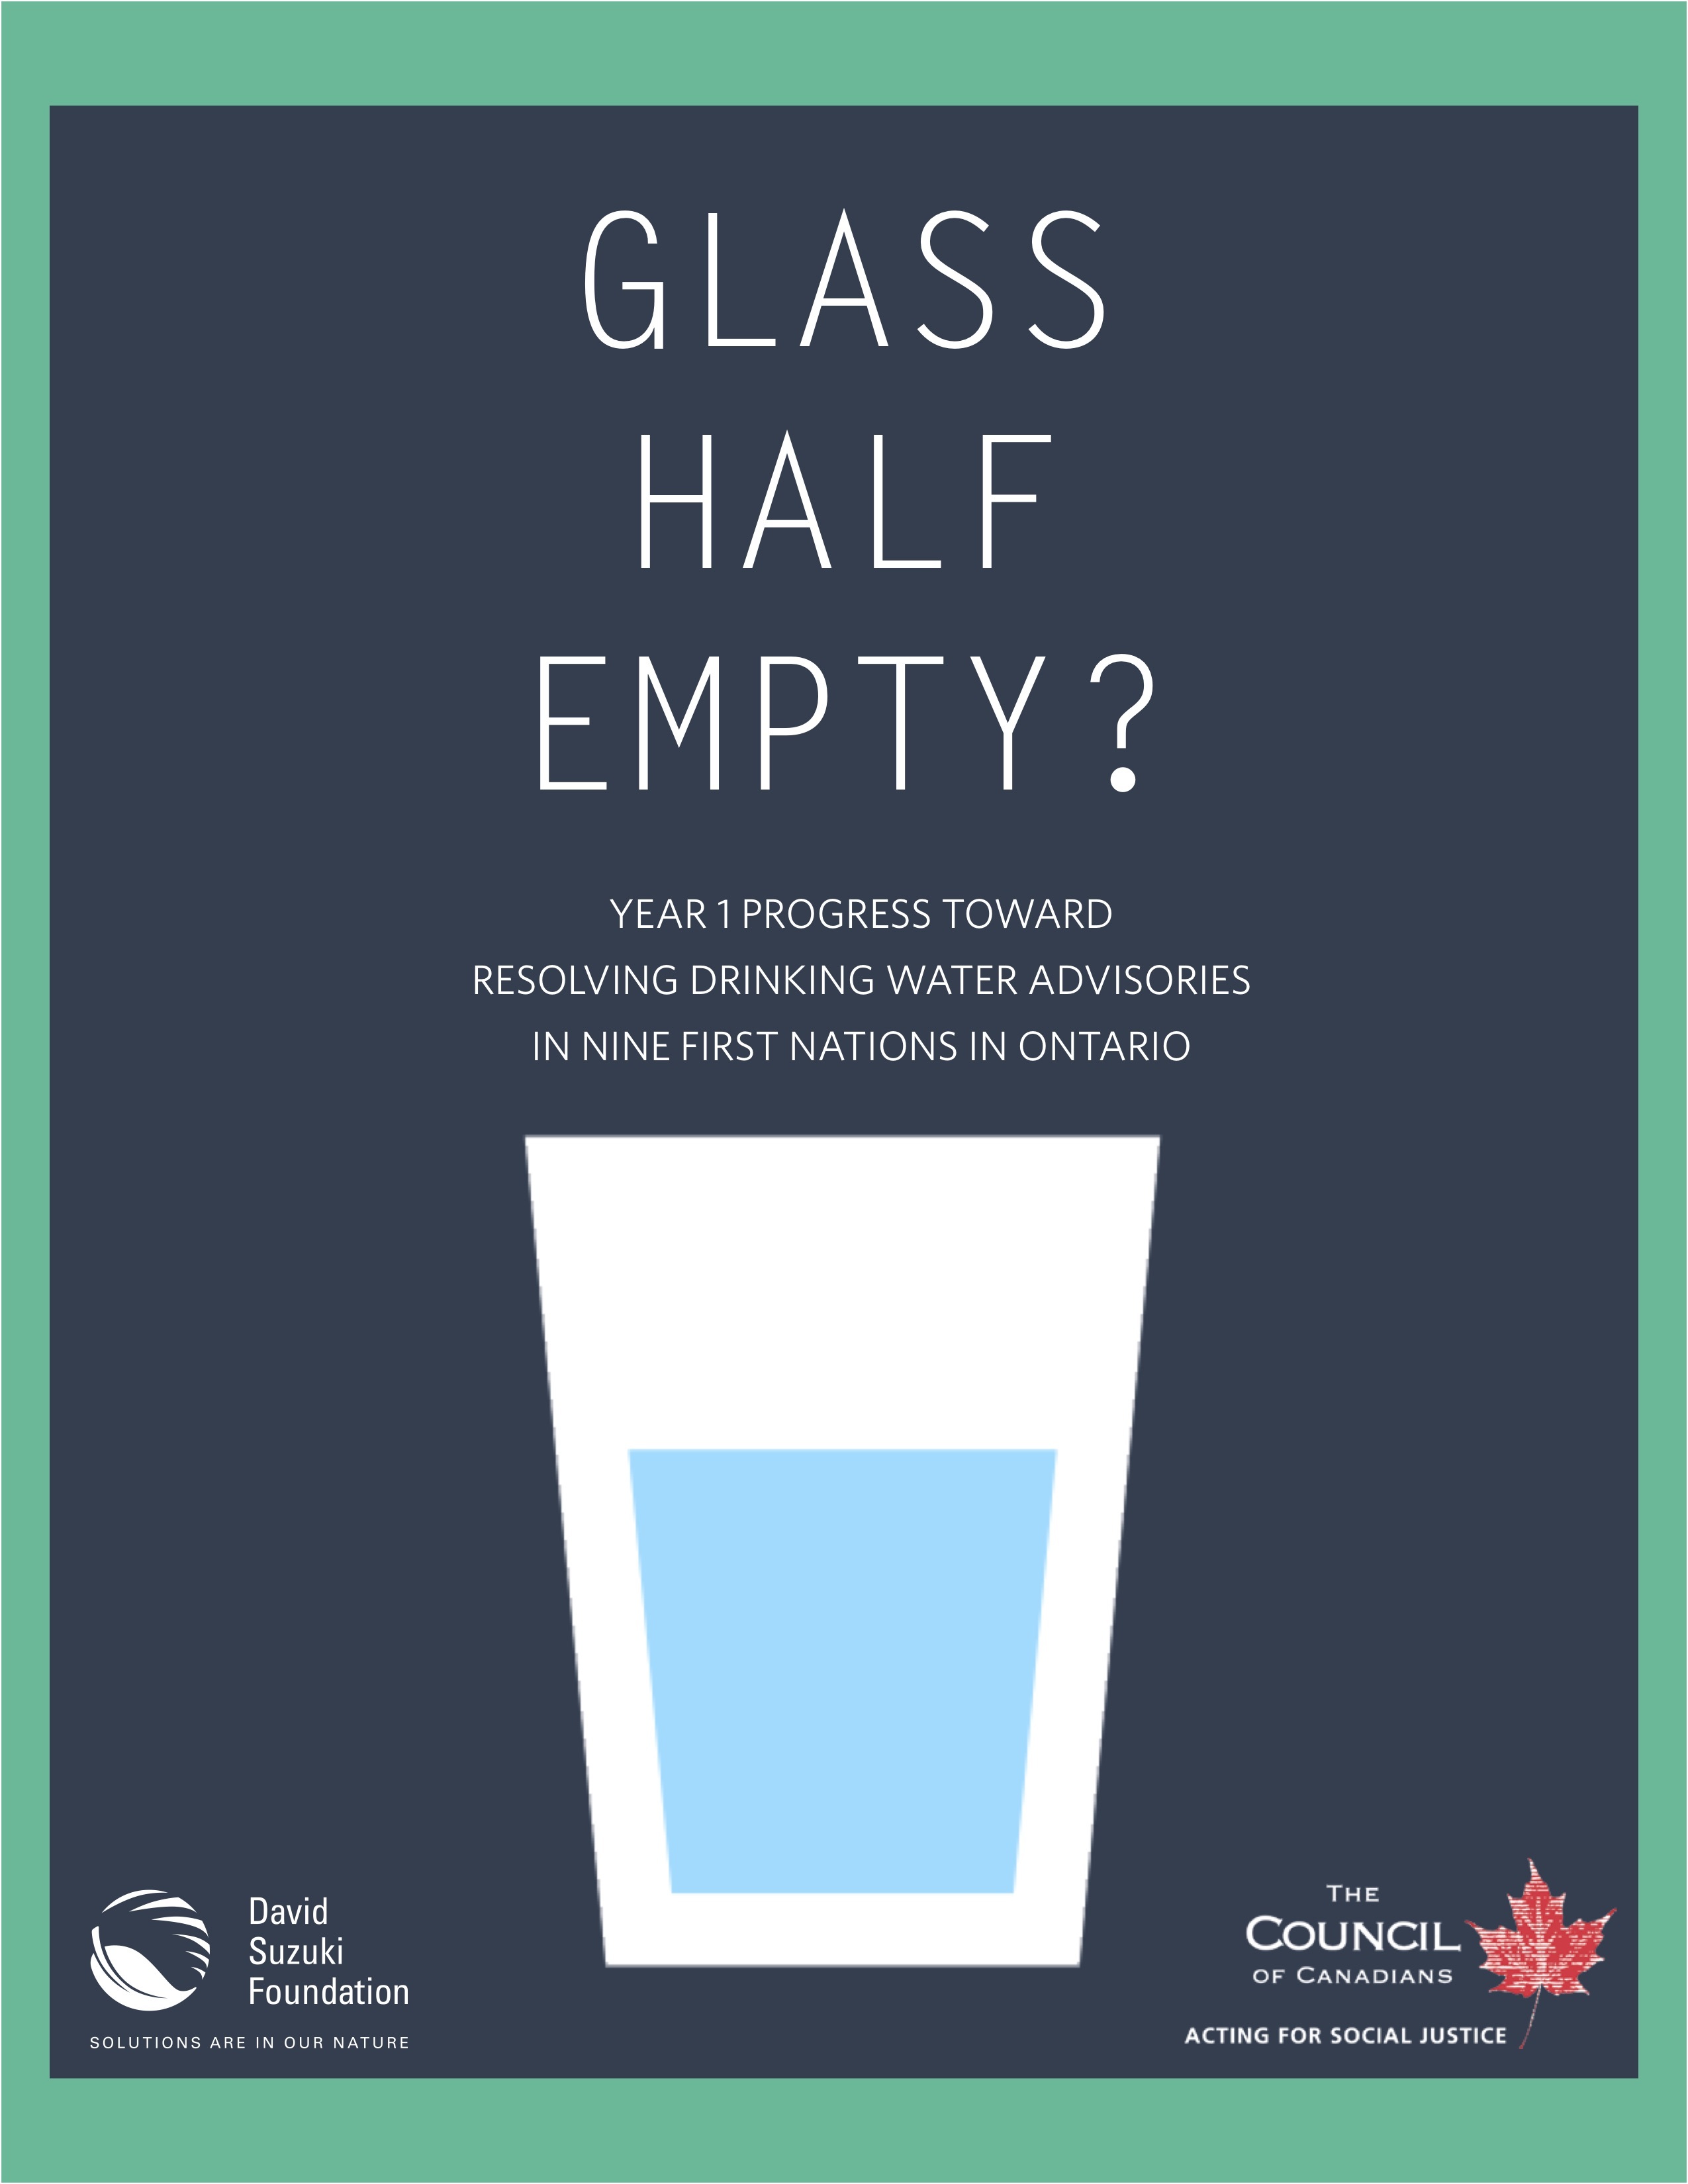 Glass Half Empty? Year 1 Progress Toward Resolving Drinking Water Advisories in Nine First Nations in Ontario cover